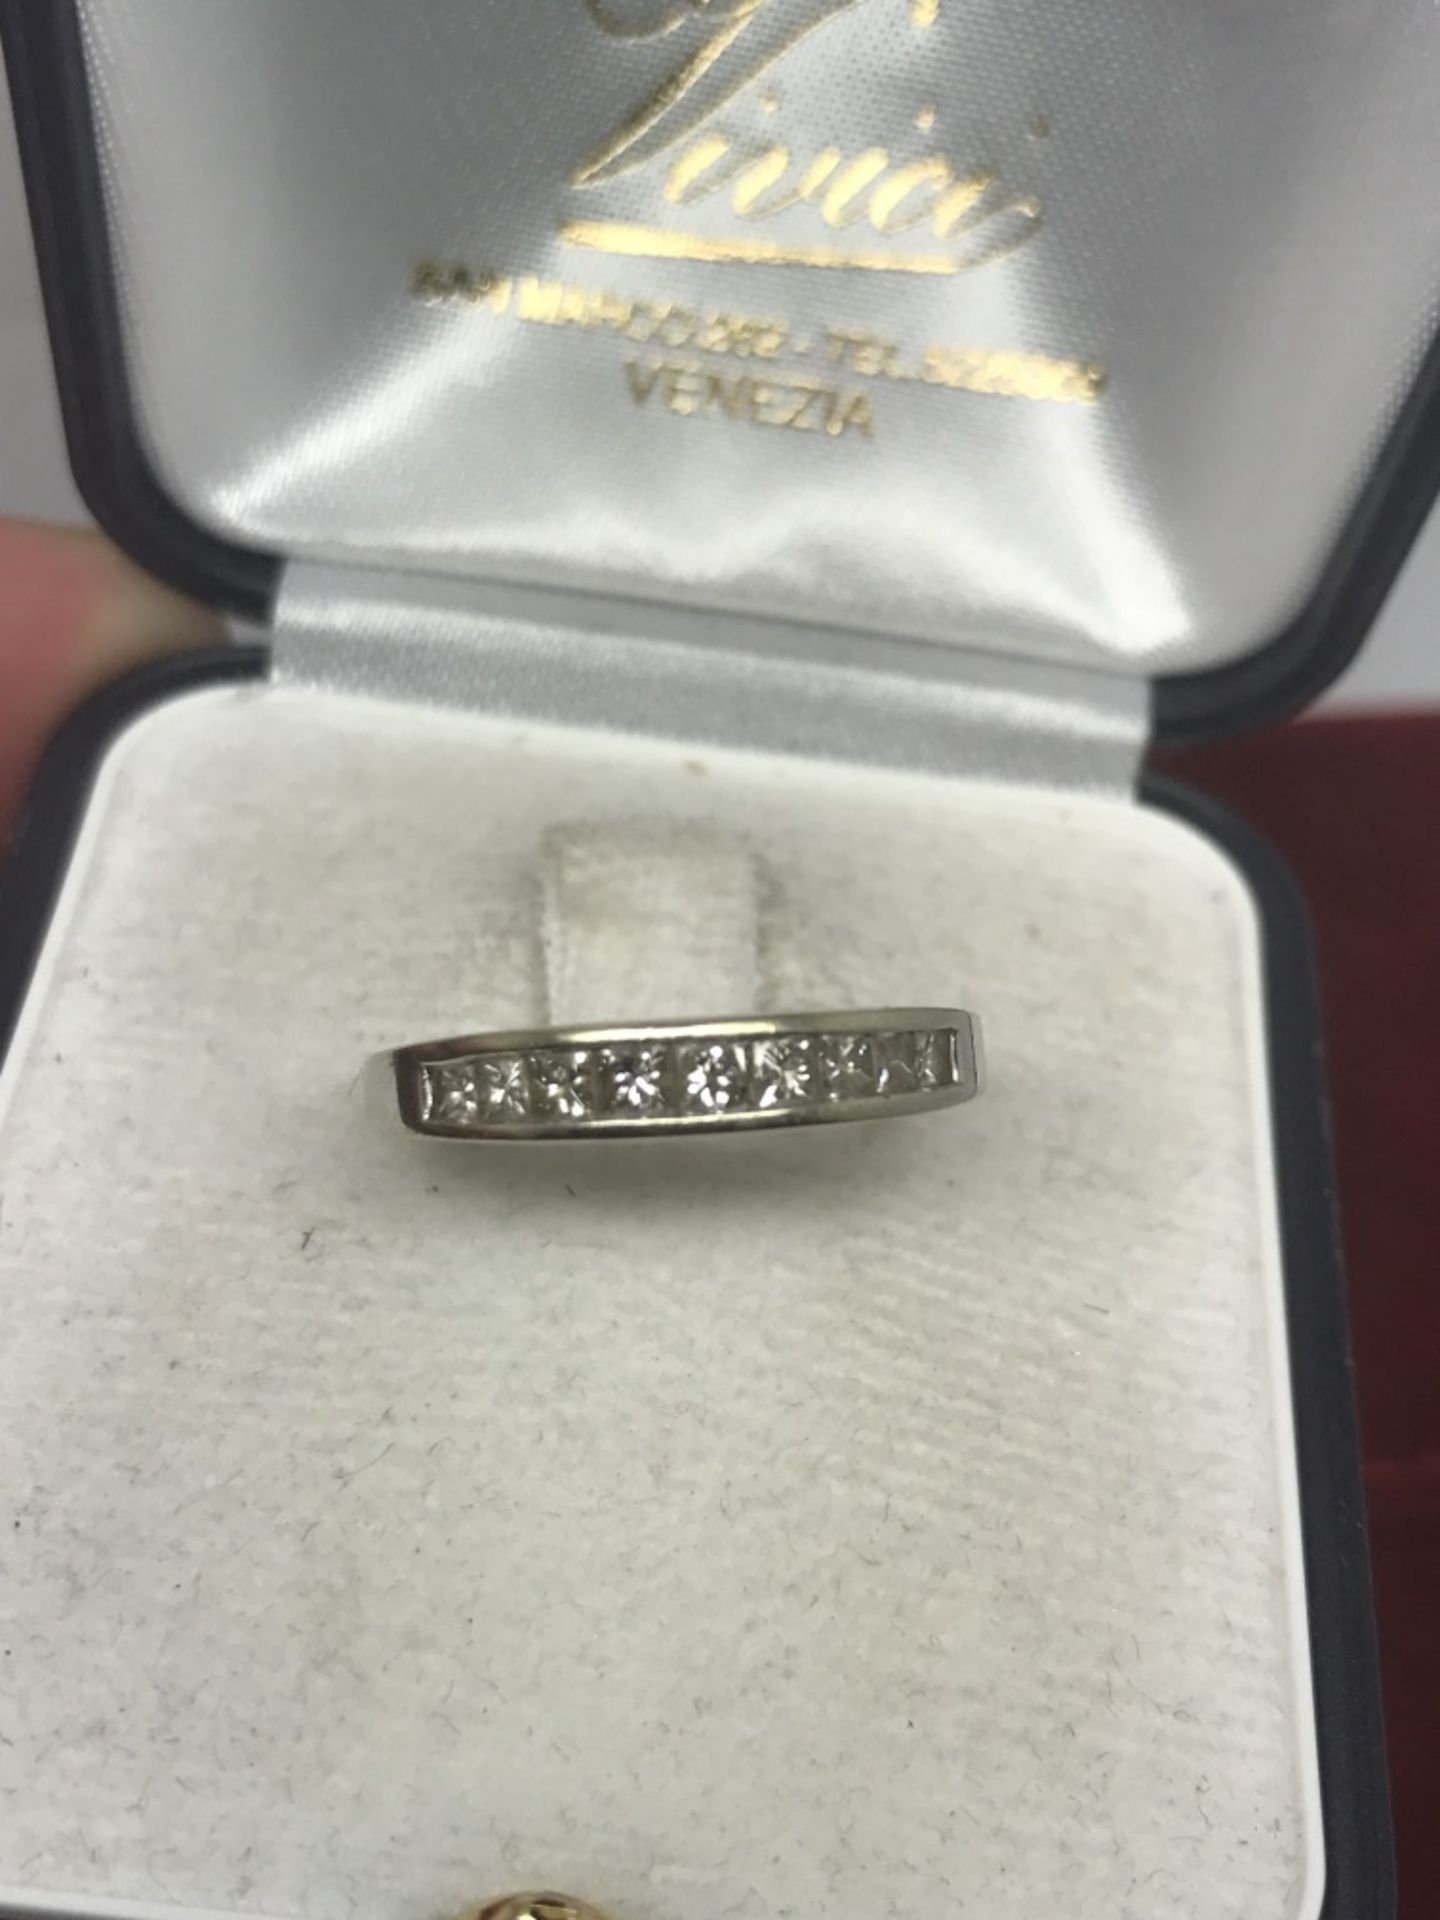 1/2 ETERNITY DIAMOND RING IN WHITE METAL TESTED AS AT LEAST 9ct GOLD